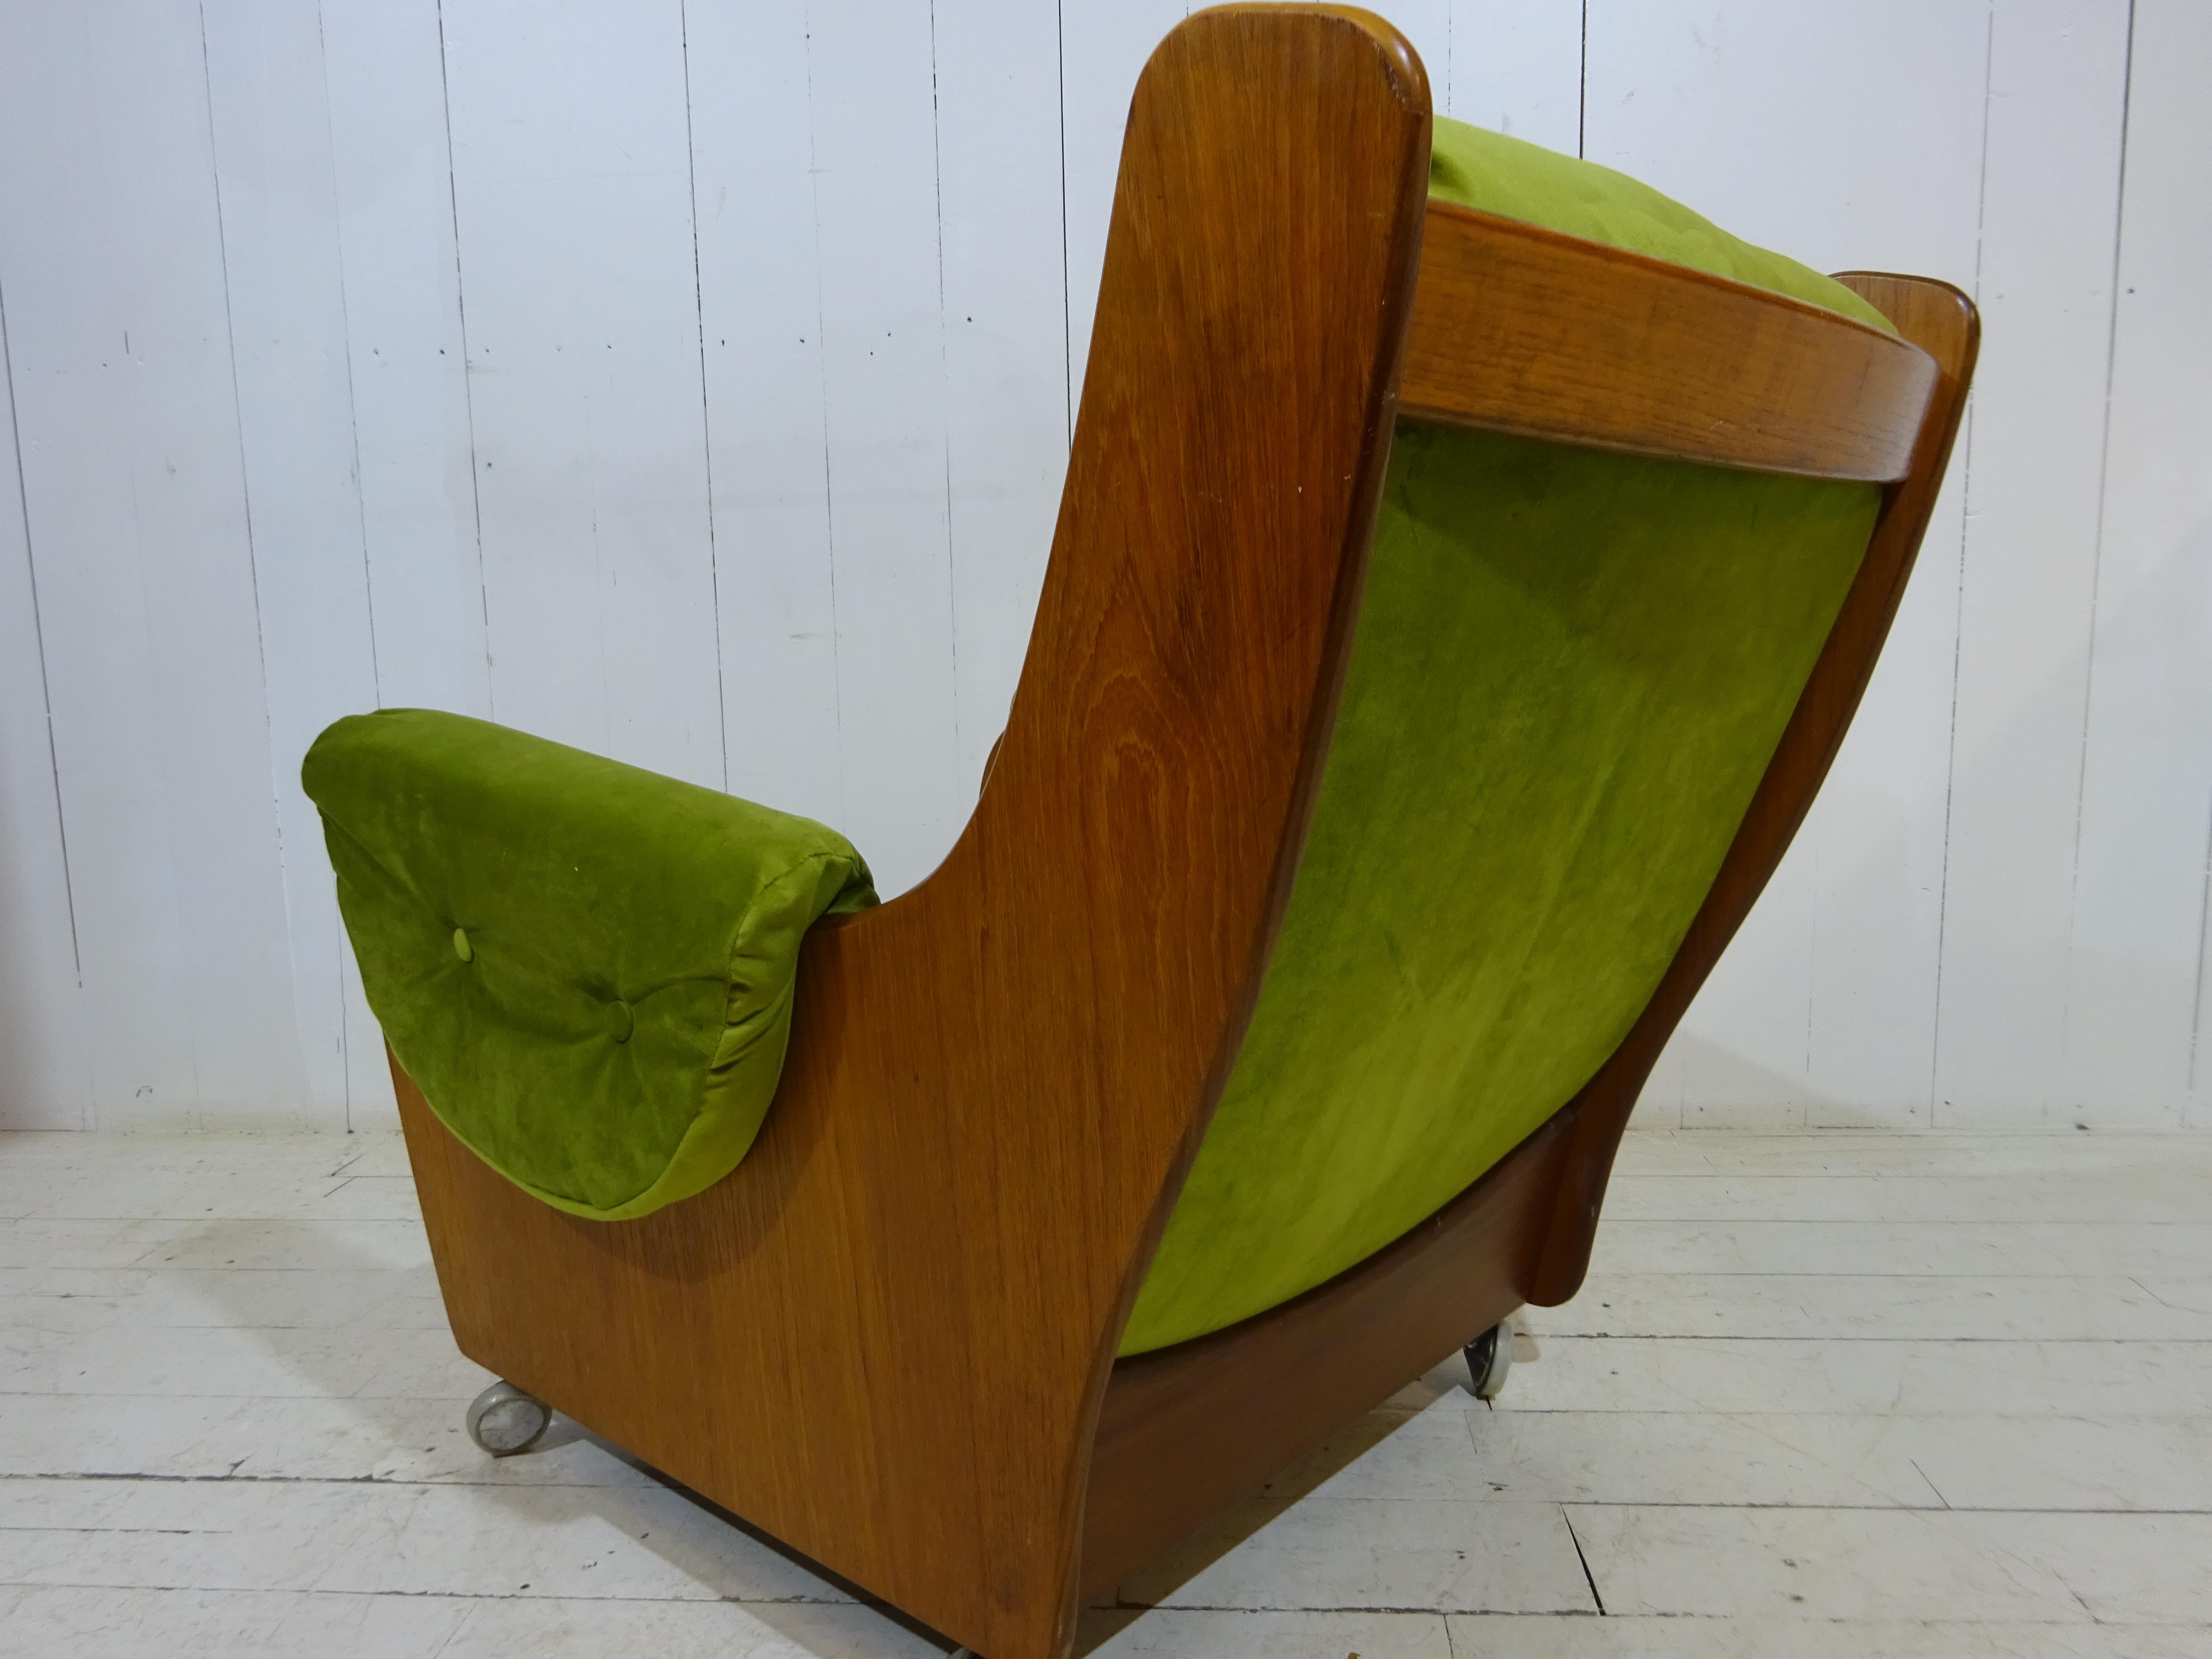 Armchair by G Plan

Love the shape and textures of this fabulous, super comfy chair! 

G Plan 

The company was founded in High Wycombe in 1898 by Ebeneezer Gomme,at first making hand-made chairs, and building a factory at Leigh Street in